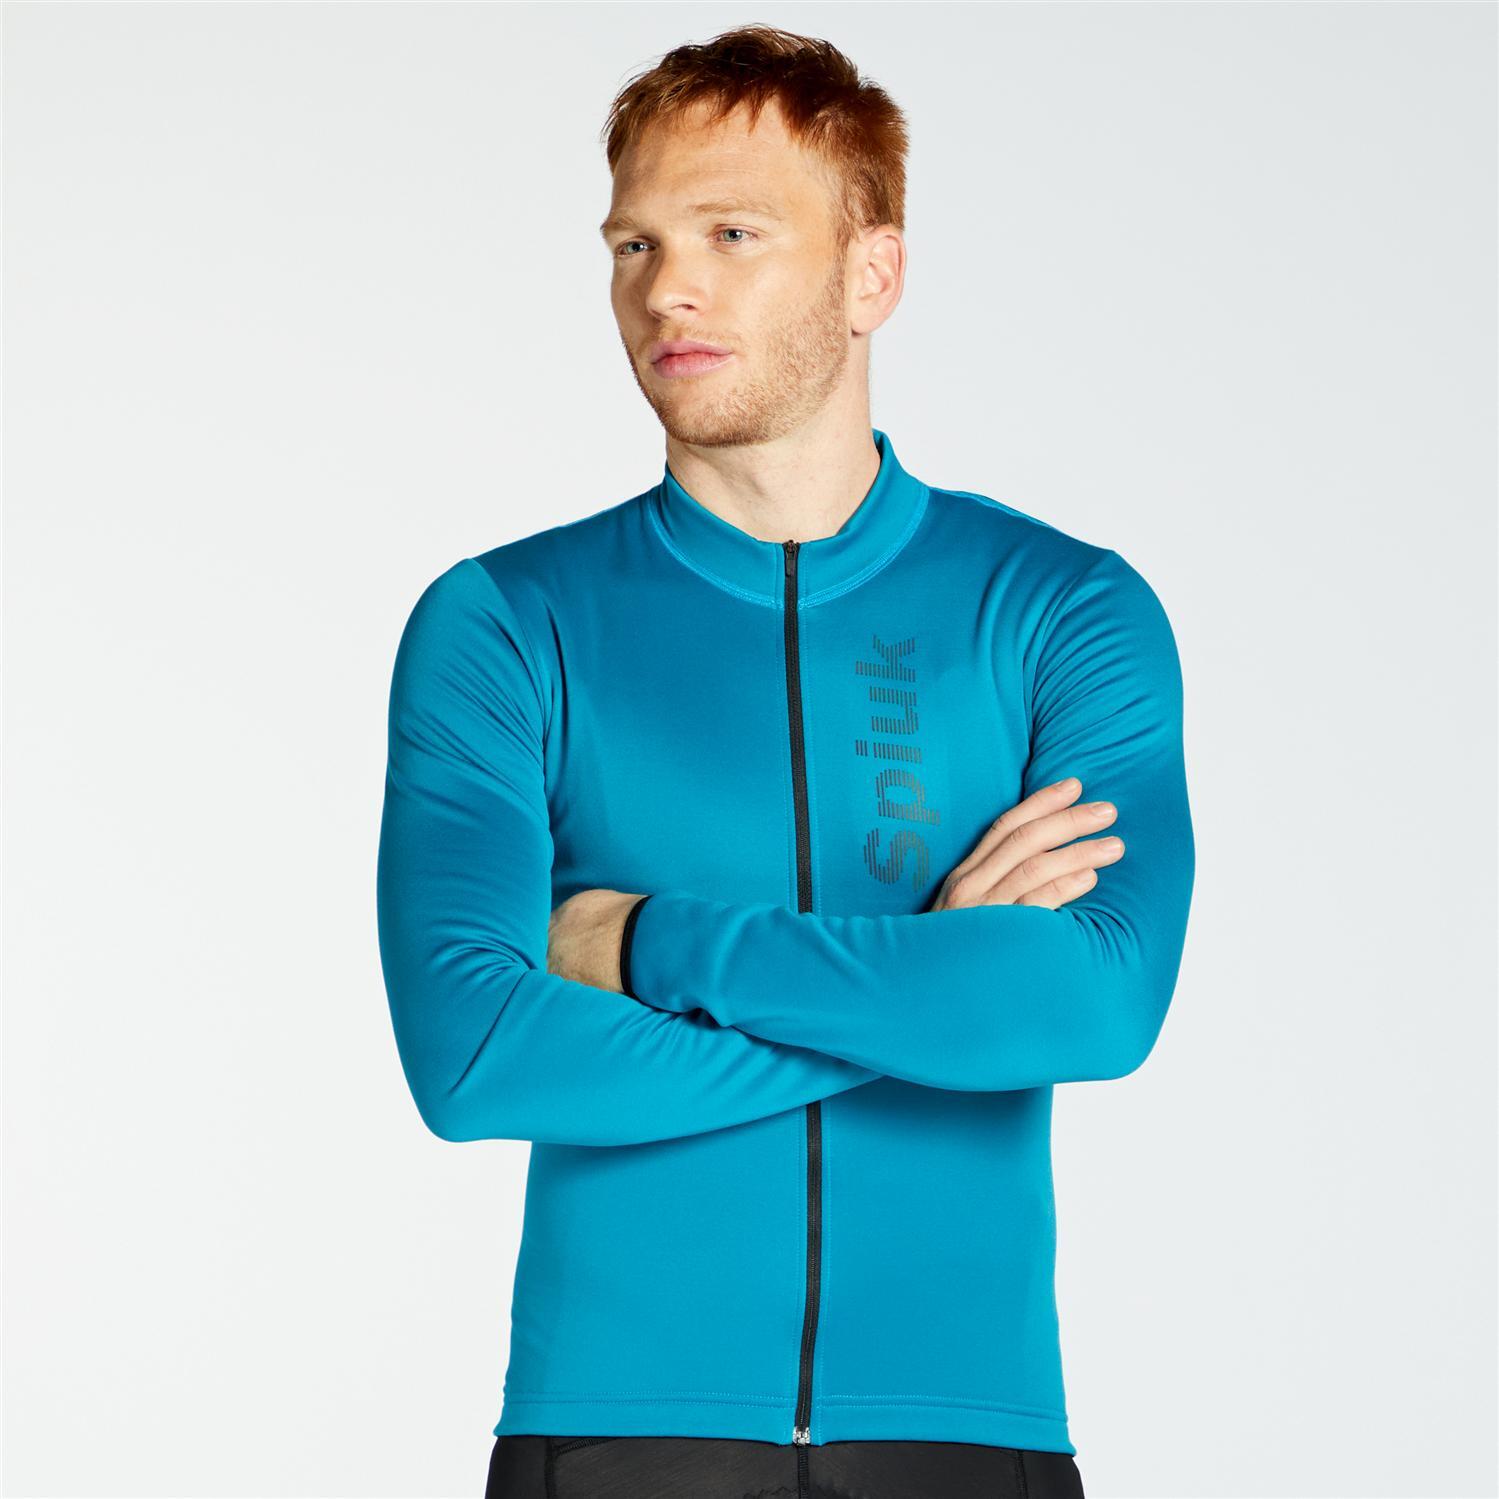 Spiuk Anatomic - Turquoise - Maillot Cyclisme Homme sports taille M